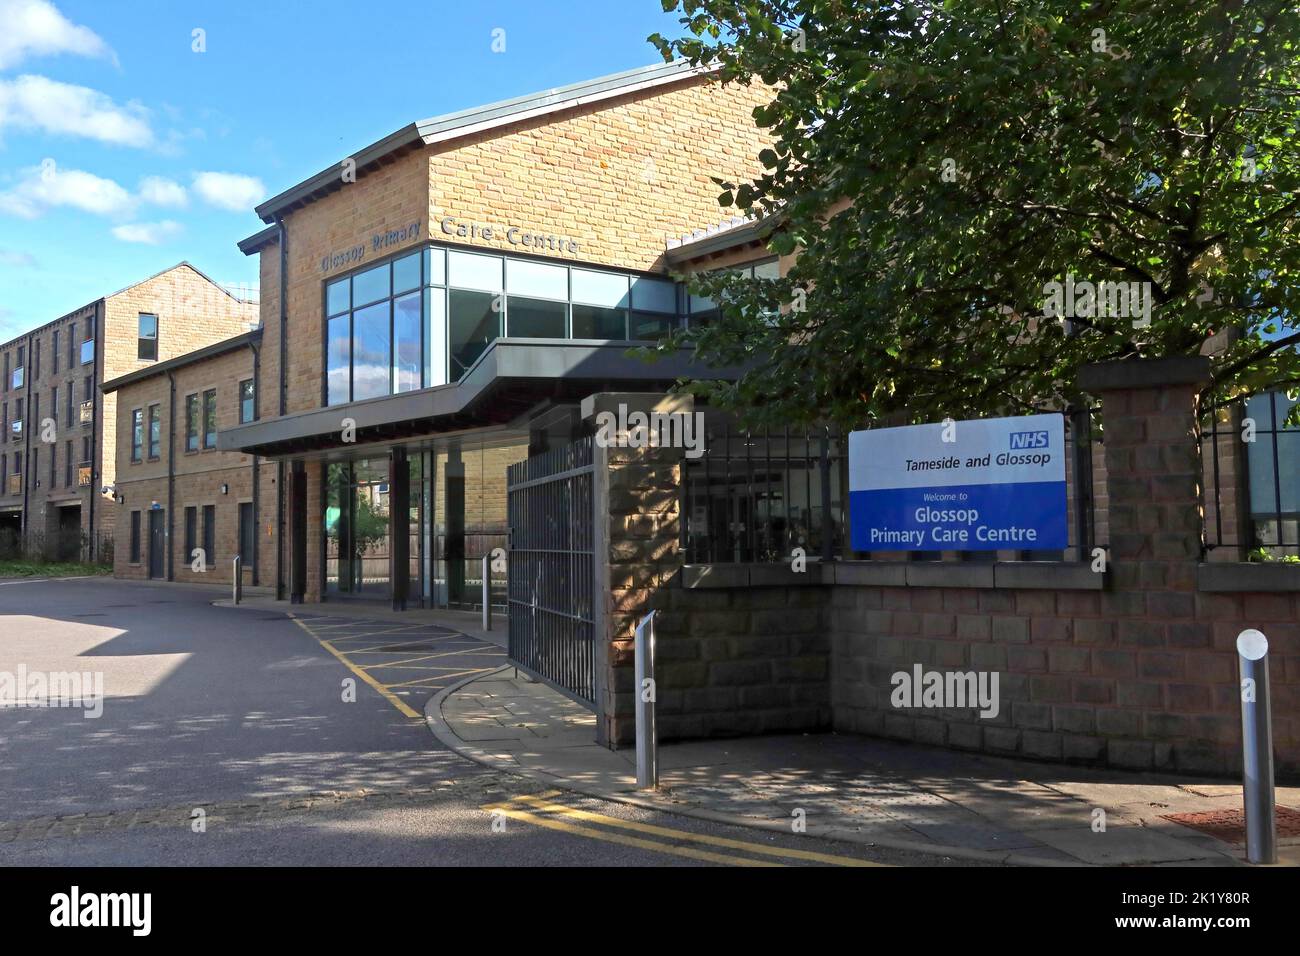 NHS Tameside and Glossop, Primary Care Centre, Foundation Trust, George Street, Glossop, High Peak, Derbyshire, Inghilterra, Regno Unito, SK13 8AY Foto Stock